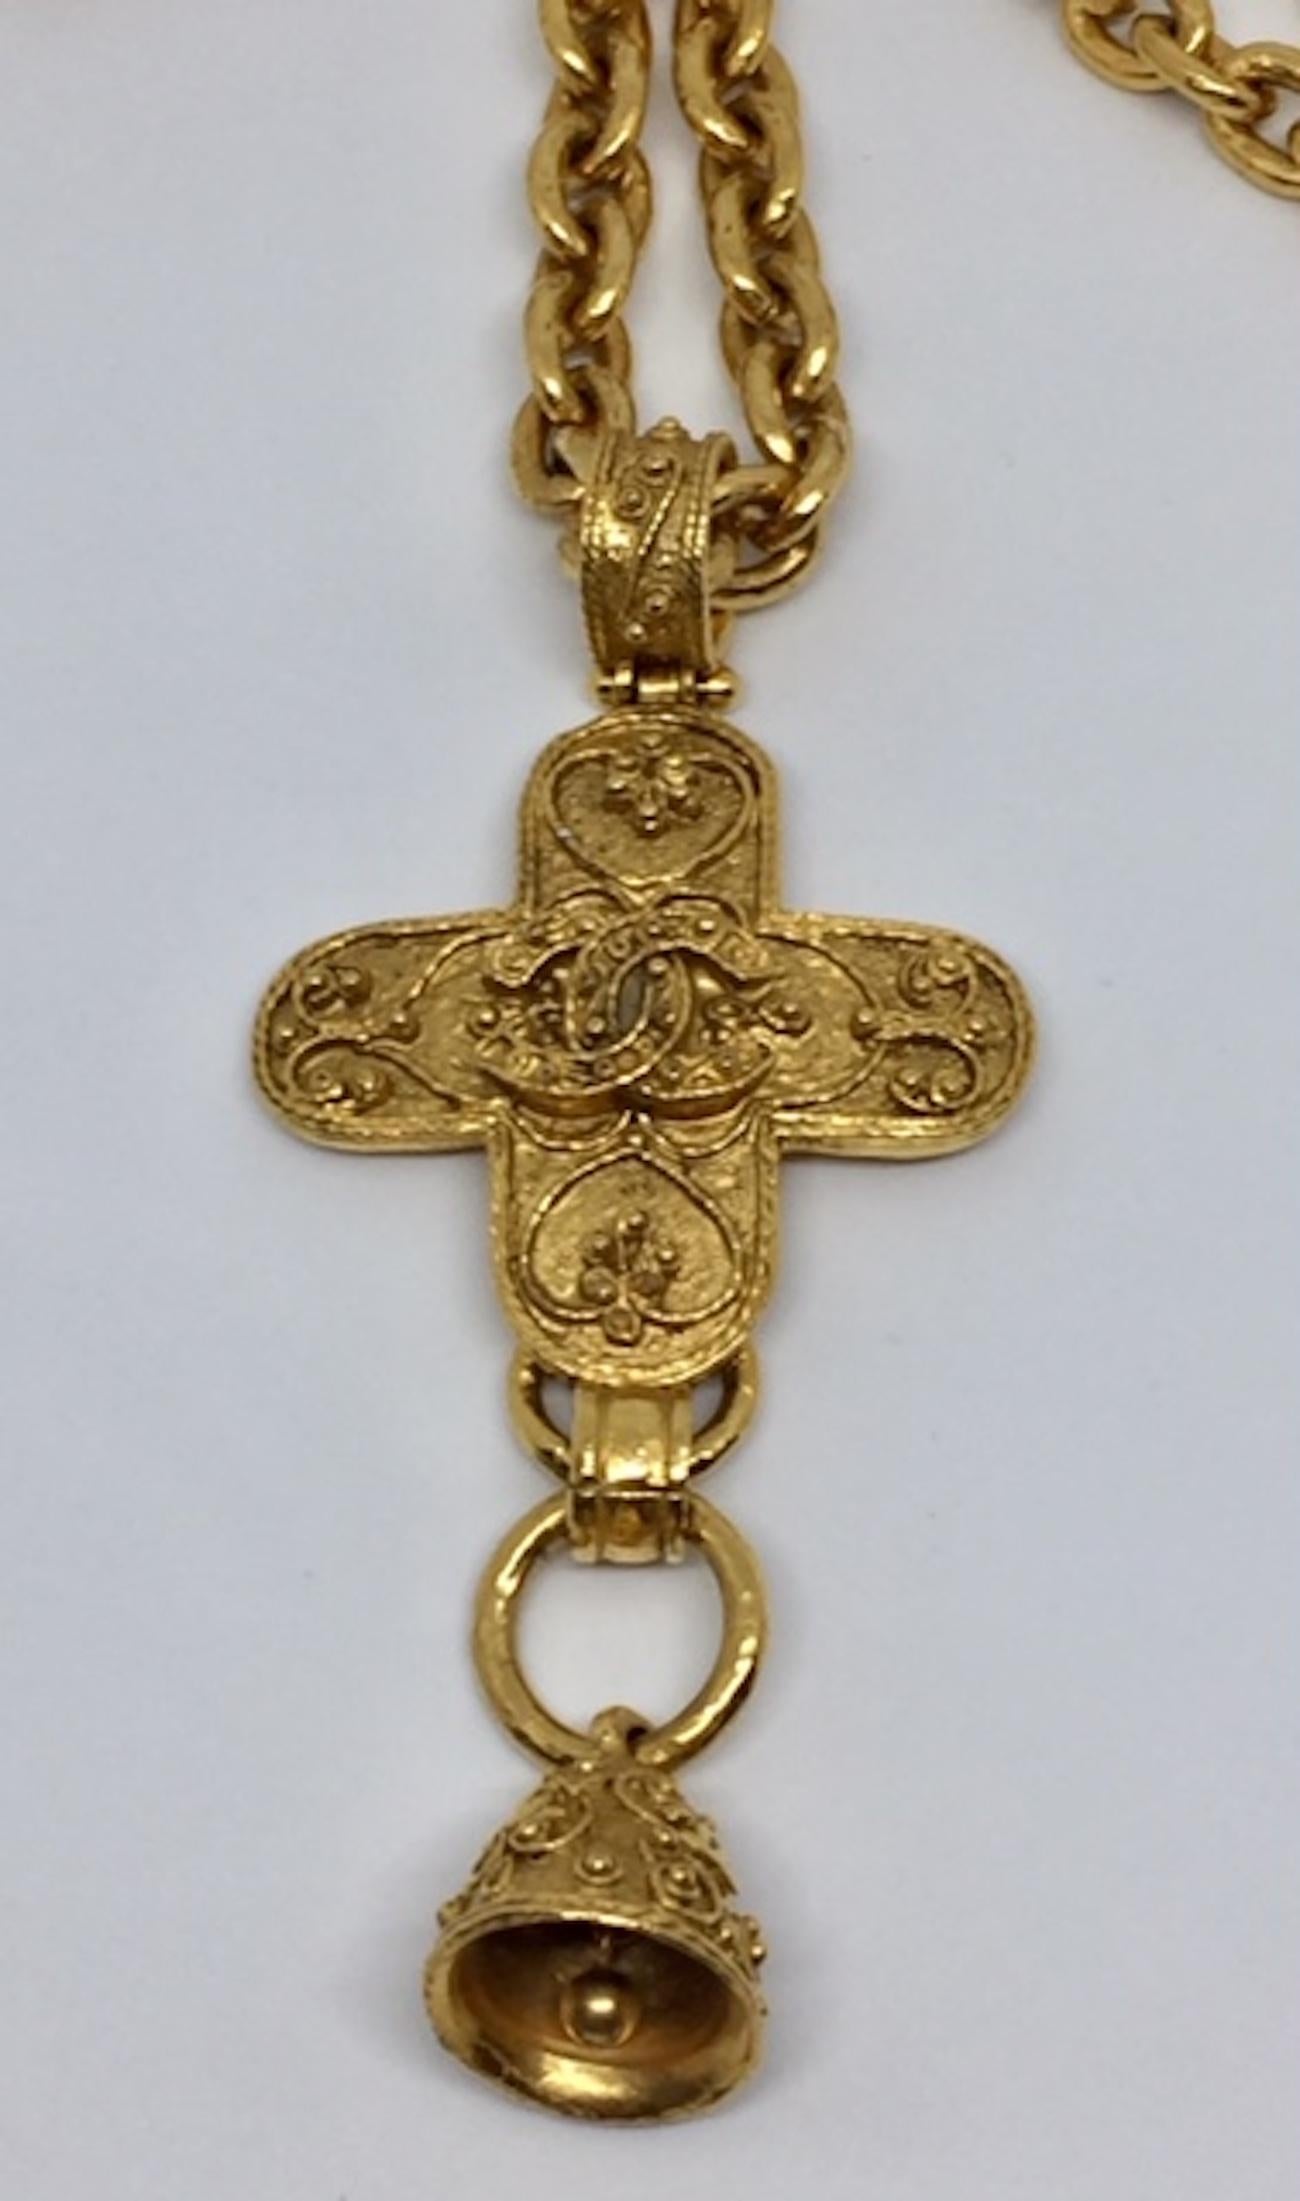 Chanel Byzantine inspired necklace of a cross with bell pendant from the Autumn 1994 collection. The pendant is 2